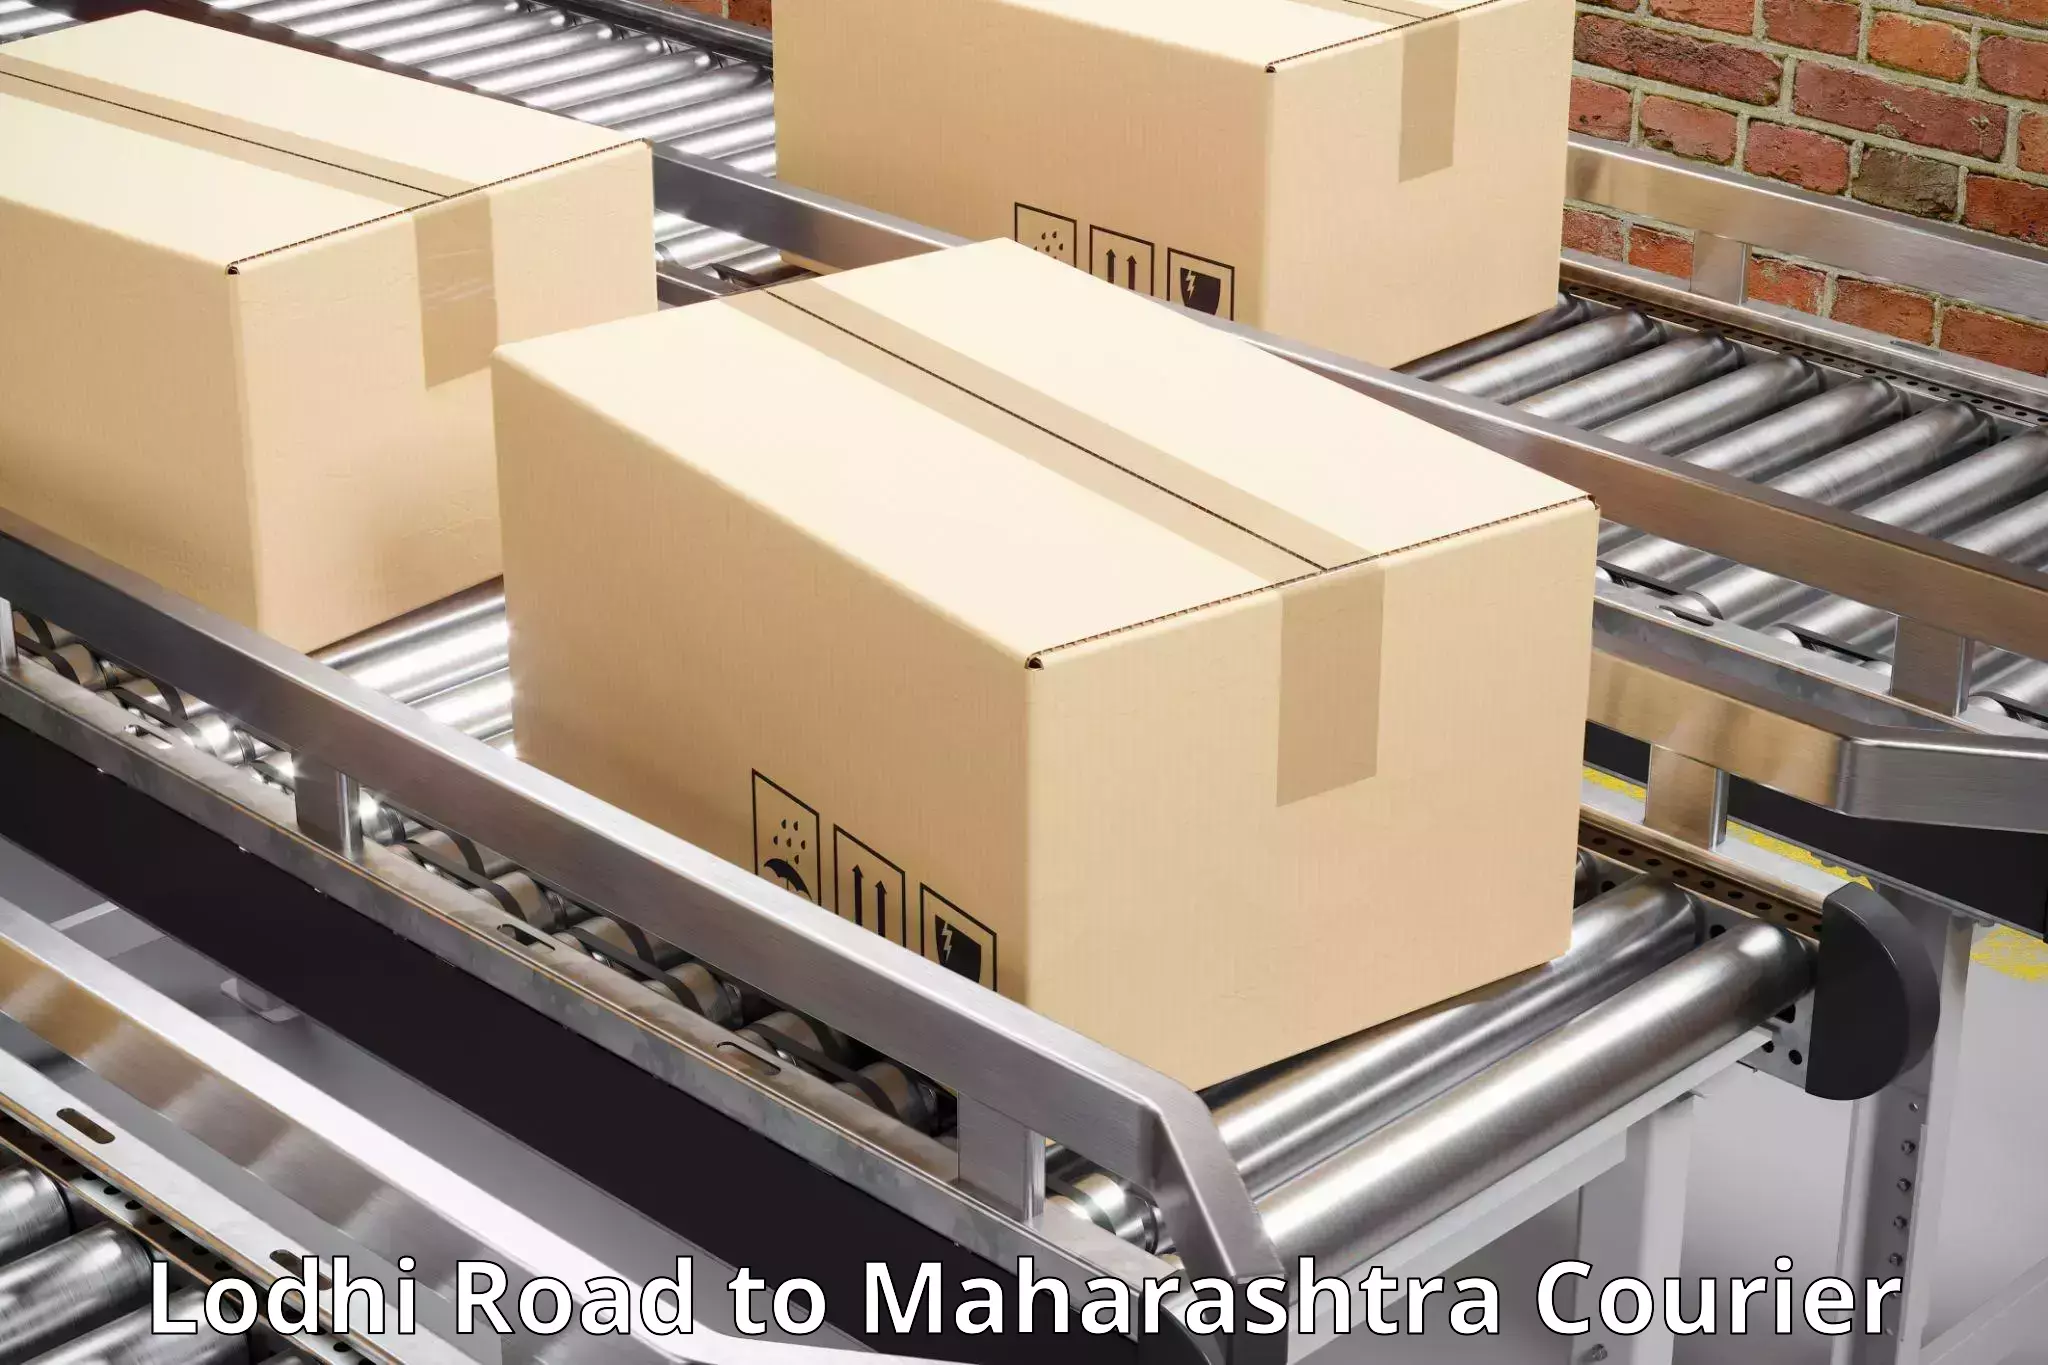 Customer-centric shipping in Lodhi Road to Malegaon